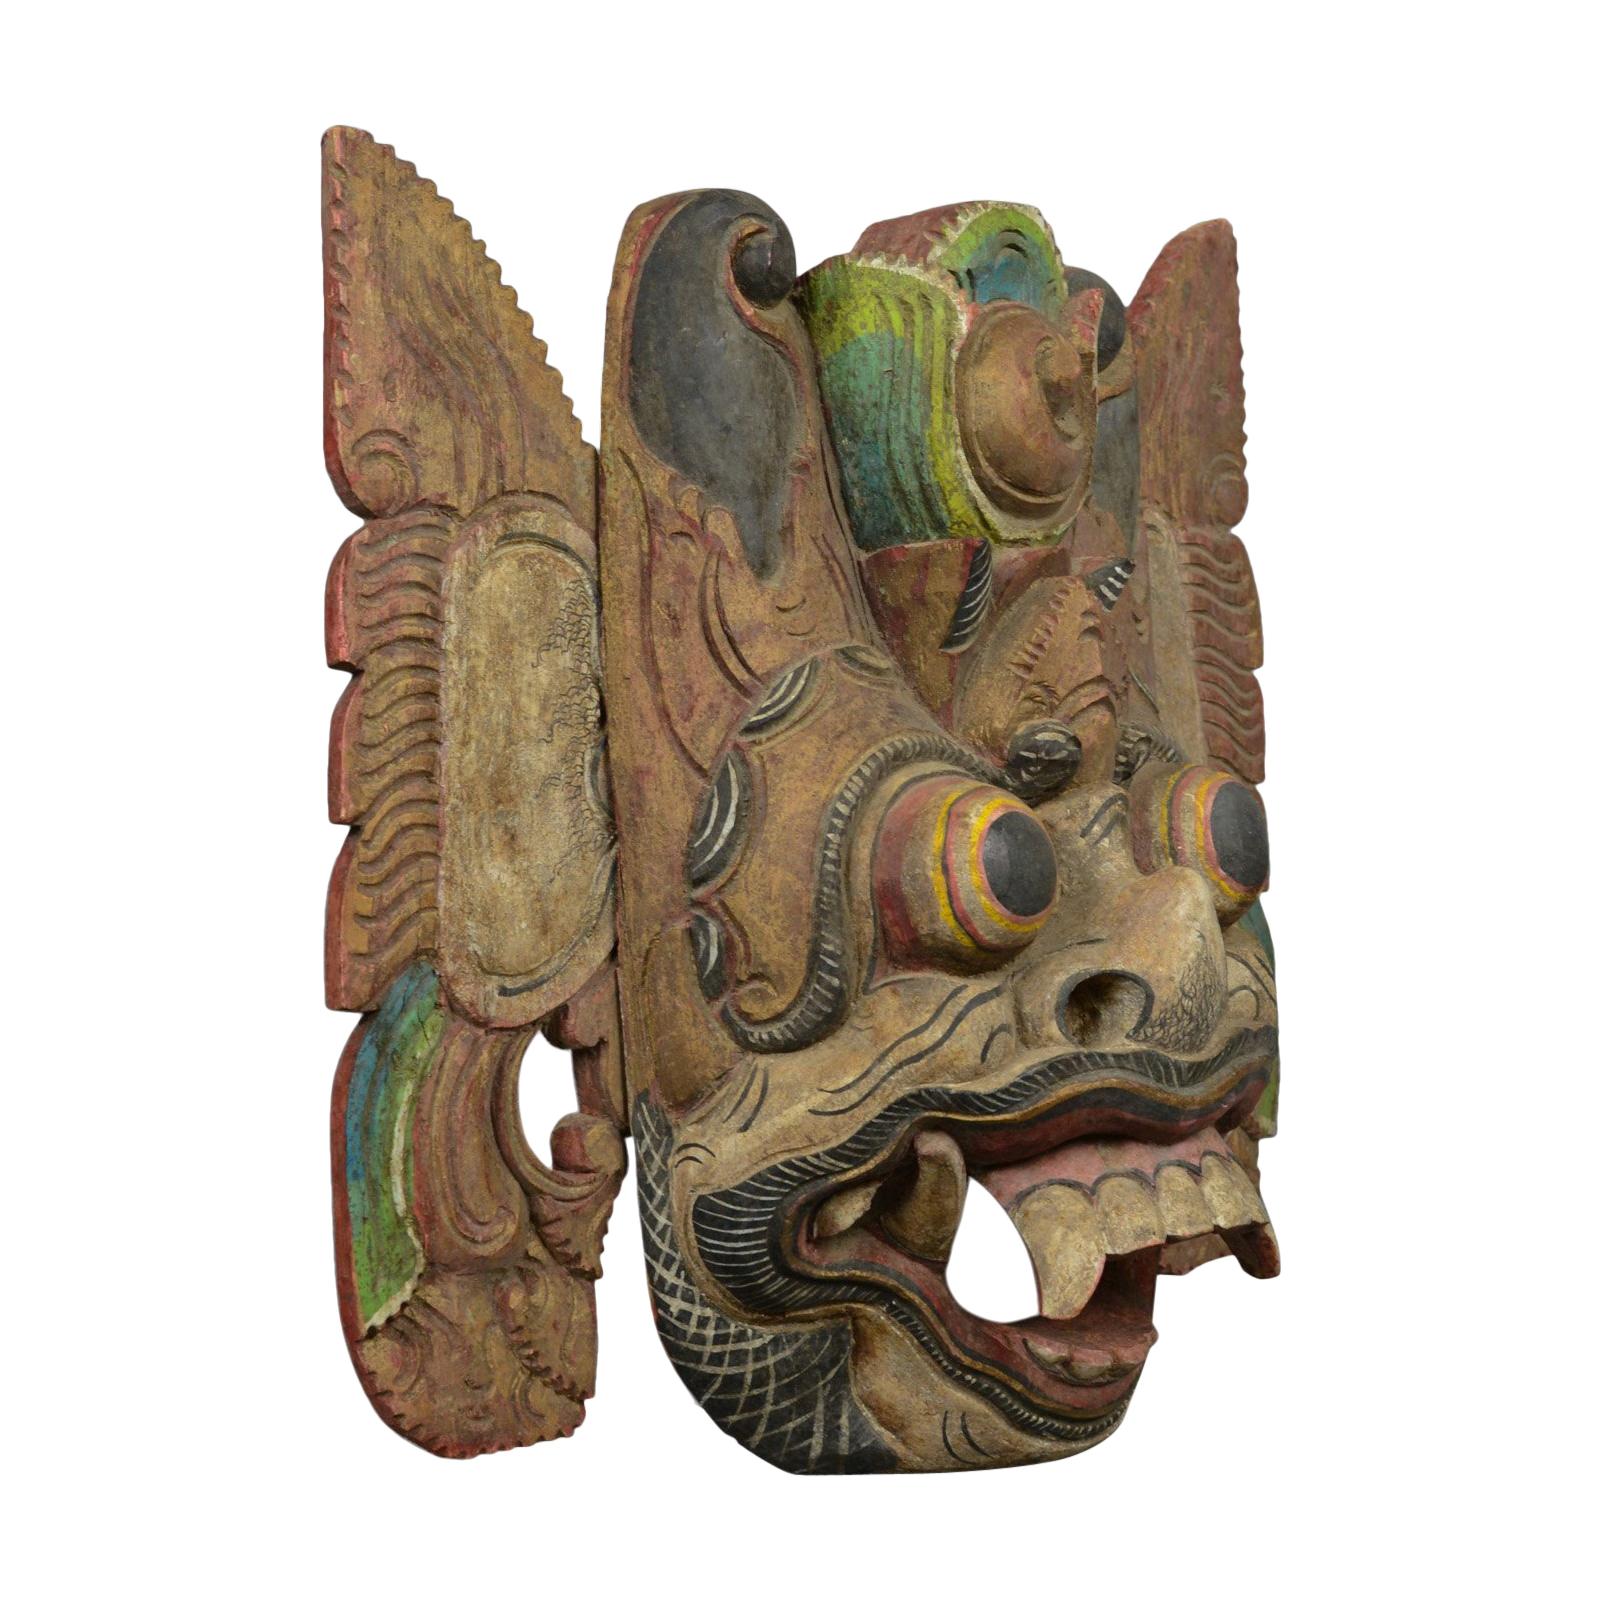 Balinese Barong Carved Mask, Decorative, Painted, Wooden Face, Wall Art, C20th